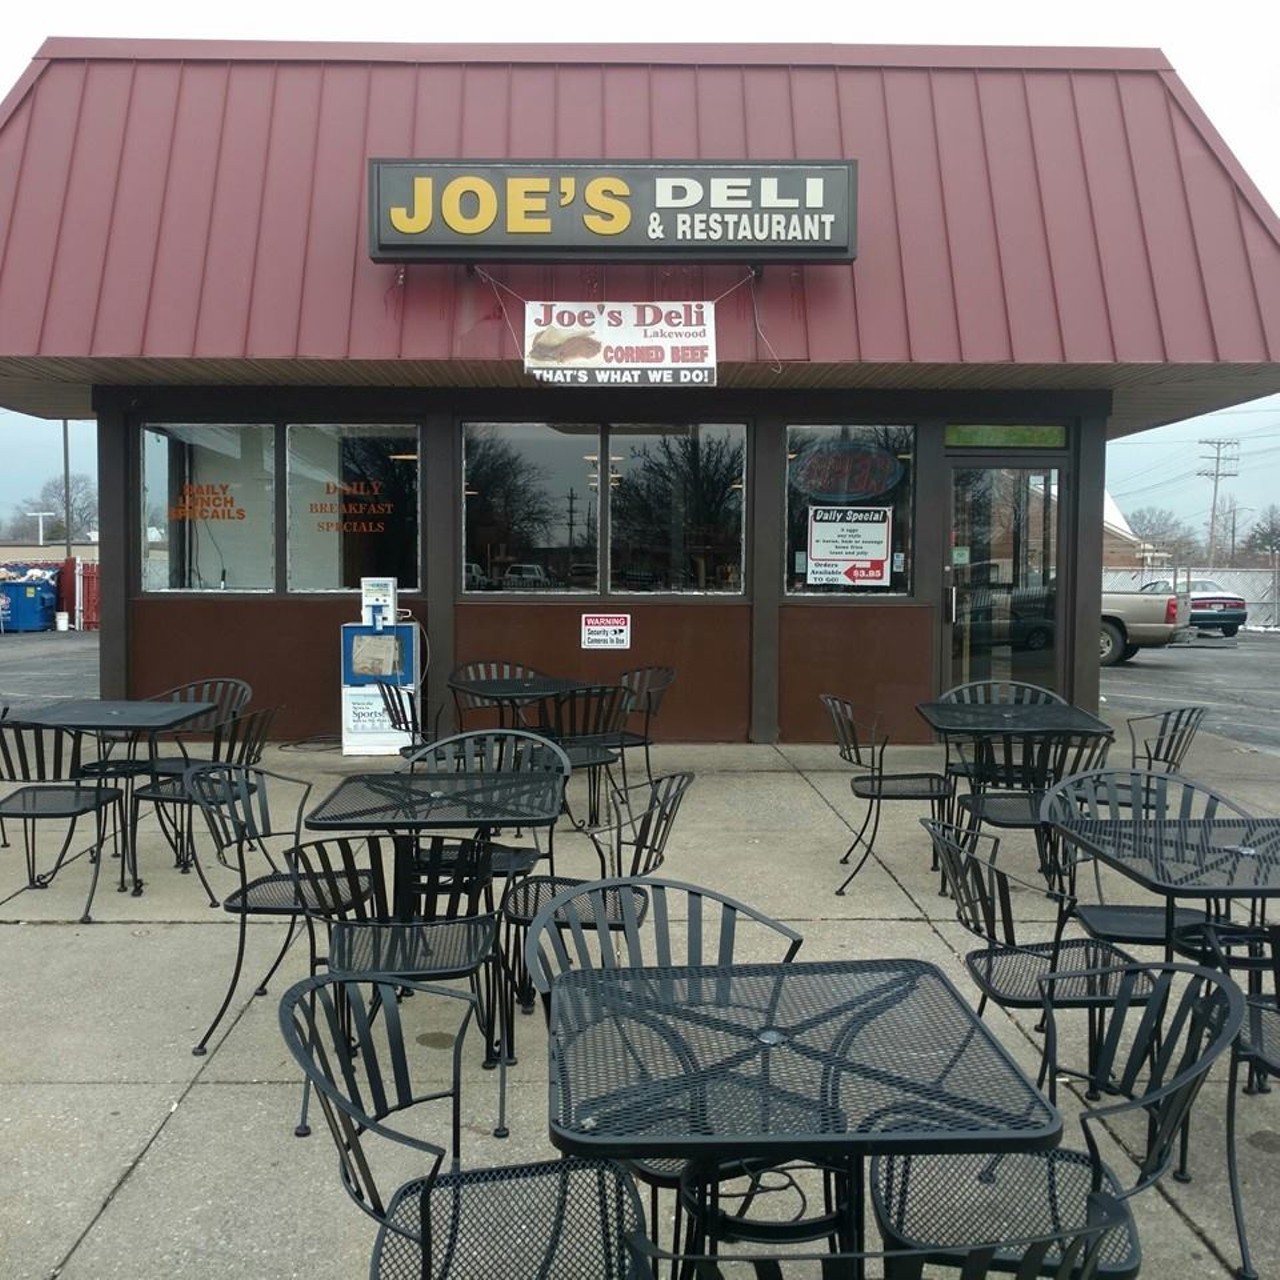  Joe&#146;s Deli
11750 Madison Ave., Lakewood
Joe&#146;s is a comfortable, tidy restaurant with a large menu of homey standards, including excellent corned-beef sandwiches, homemade soups and freshly-made Middle Eastern specialties.The breakfast goes until 10:30 a.m. so get there early and try the potato pancakes. 
Photo via Joe&#146;s Deli Lakewood/Facebook